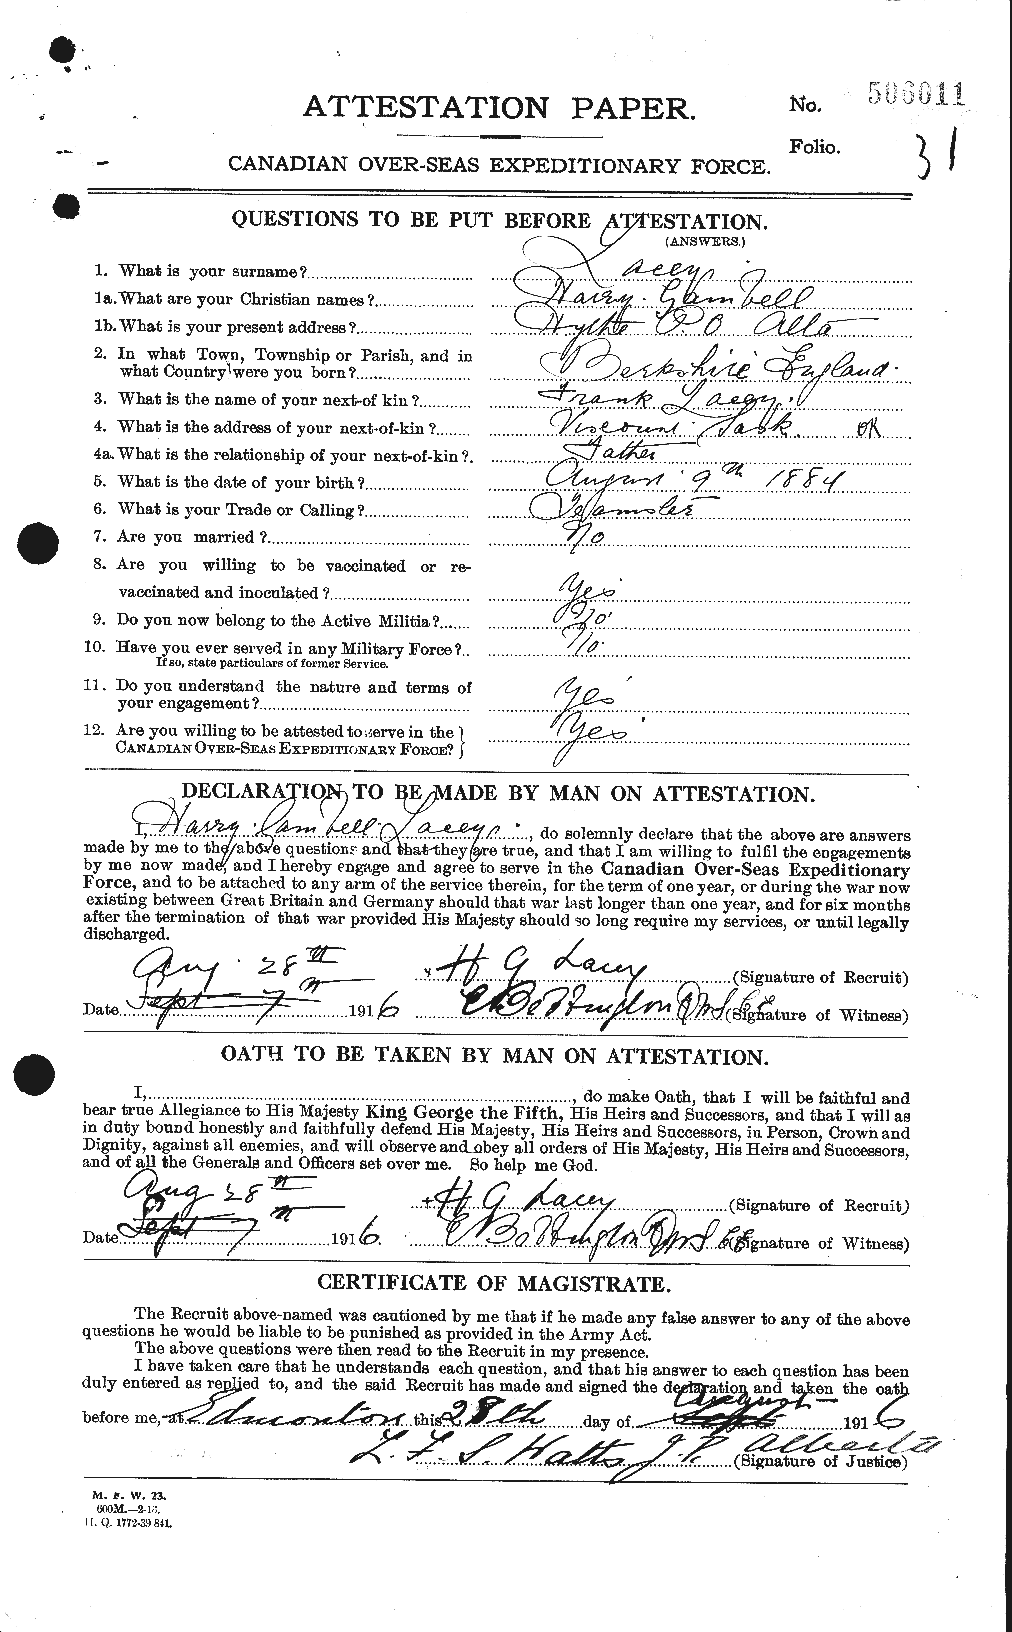 Personnel Records of the First World War - CEF 444503a